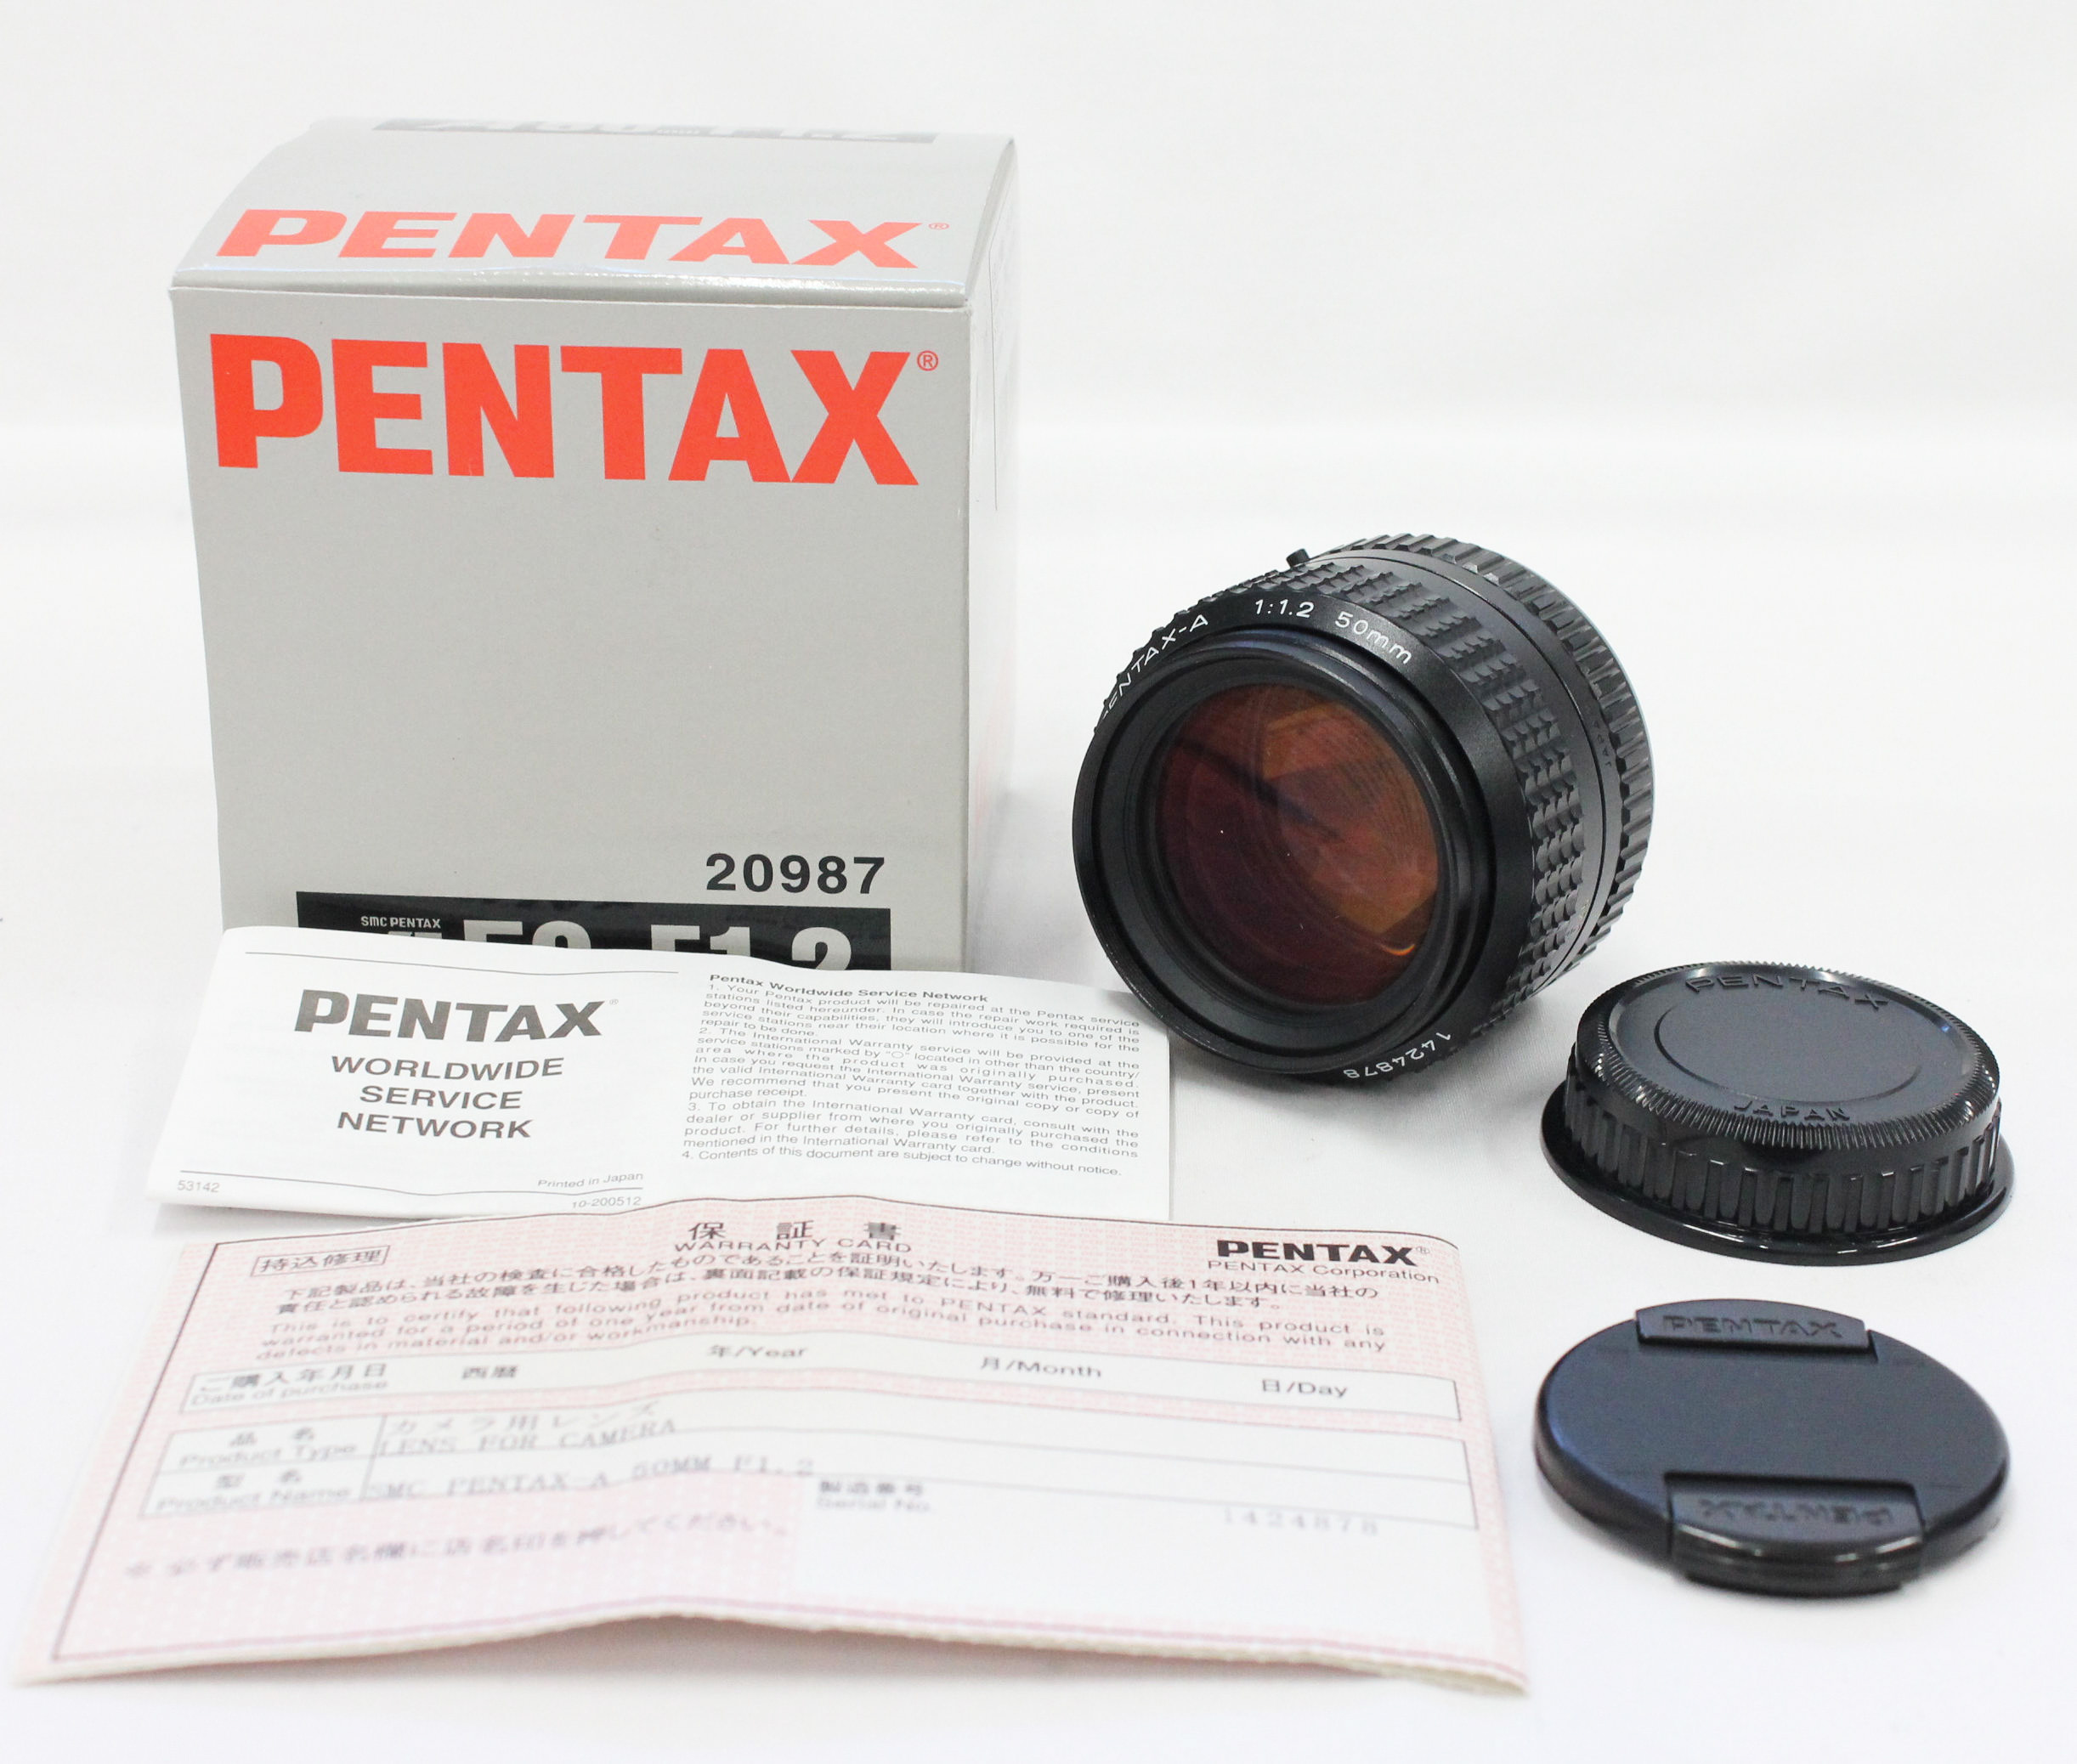 Japan Used Camera Shop | [MINT] SMC PENTAX-A 50mm F/1.2 MF Lens for K Mount from Japan